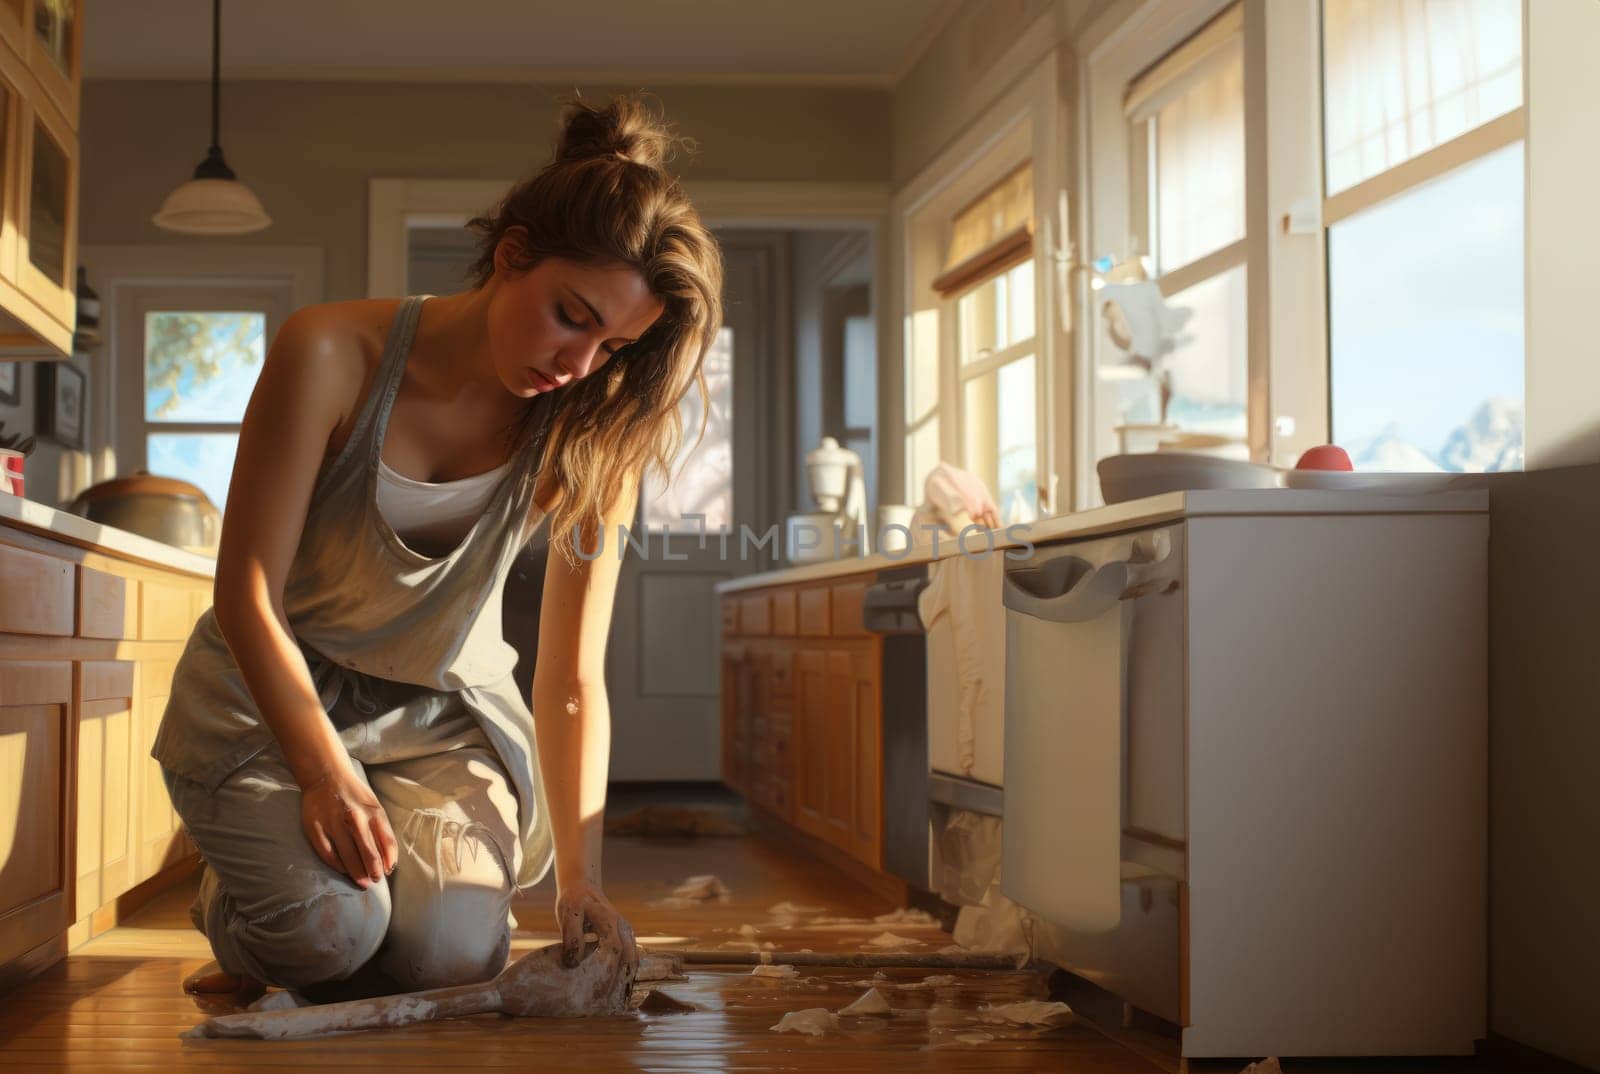 A scene of domestic fatigue, a tired woman diligently cleans both the living room and kitchen, showcasing the everyday challenges of household upkeep